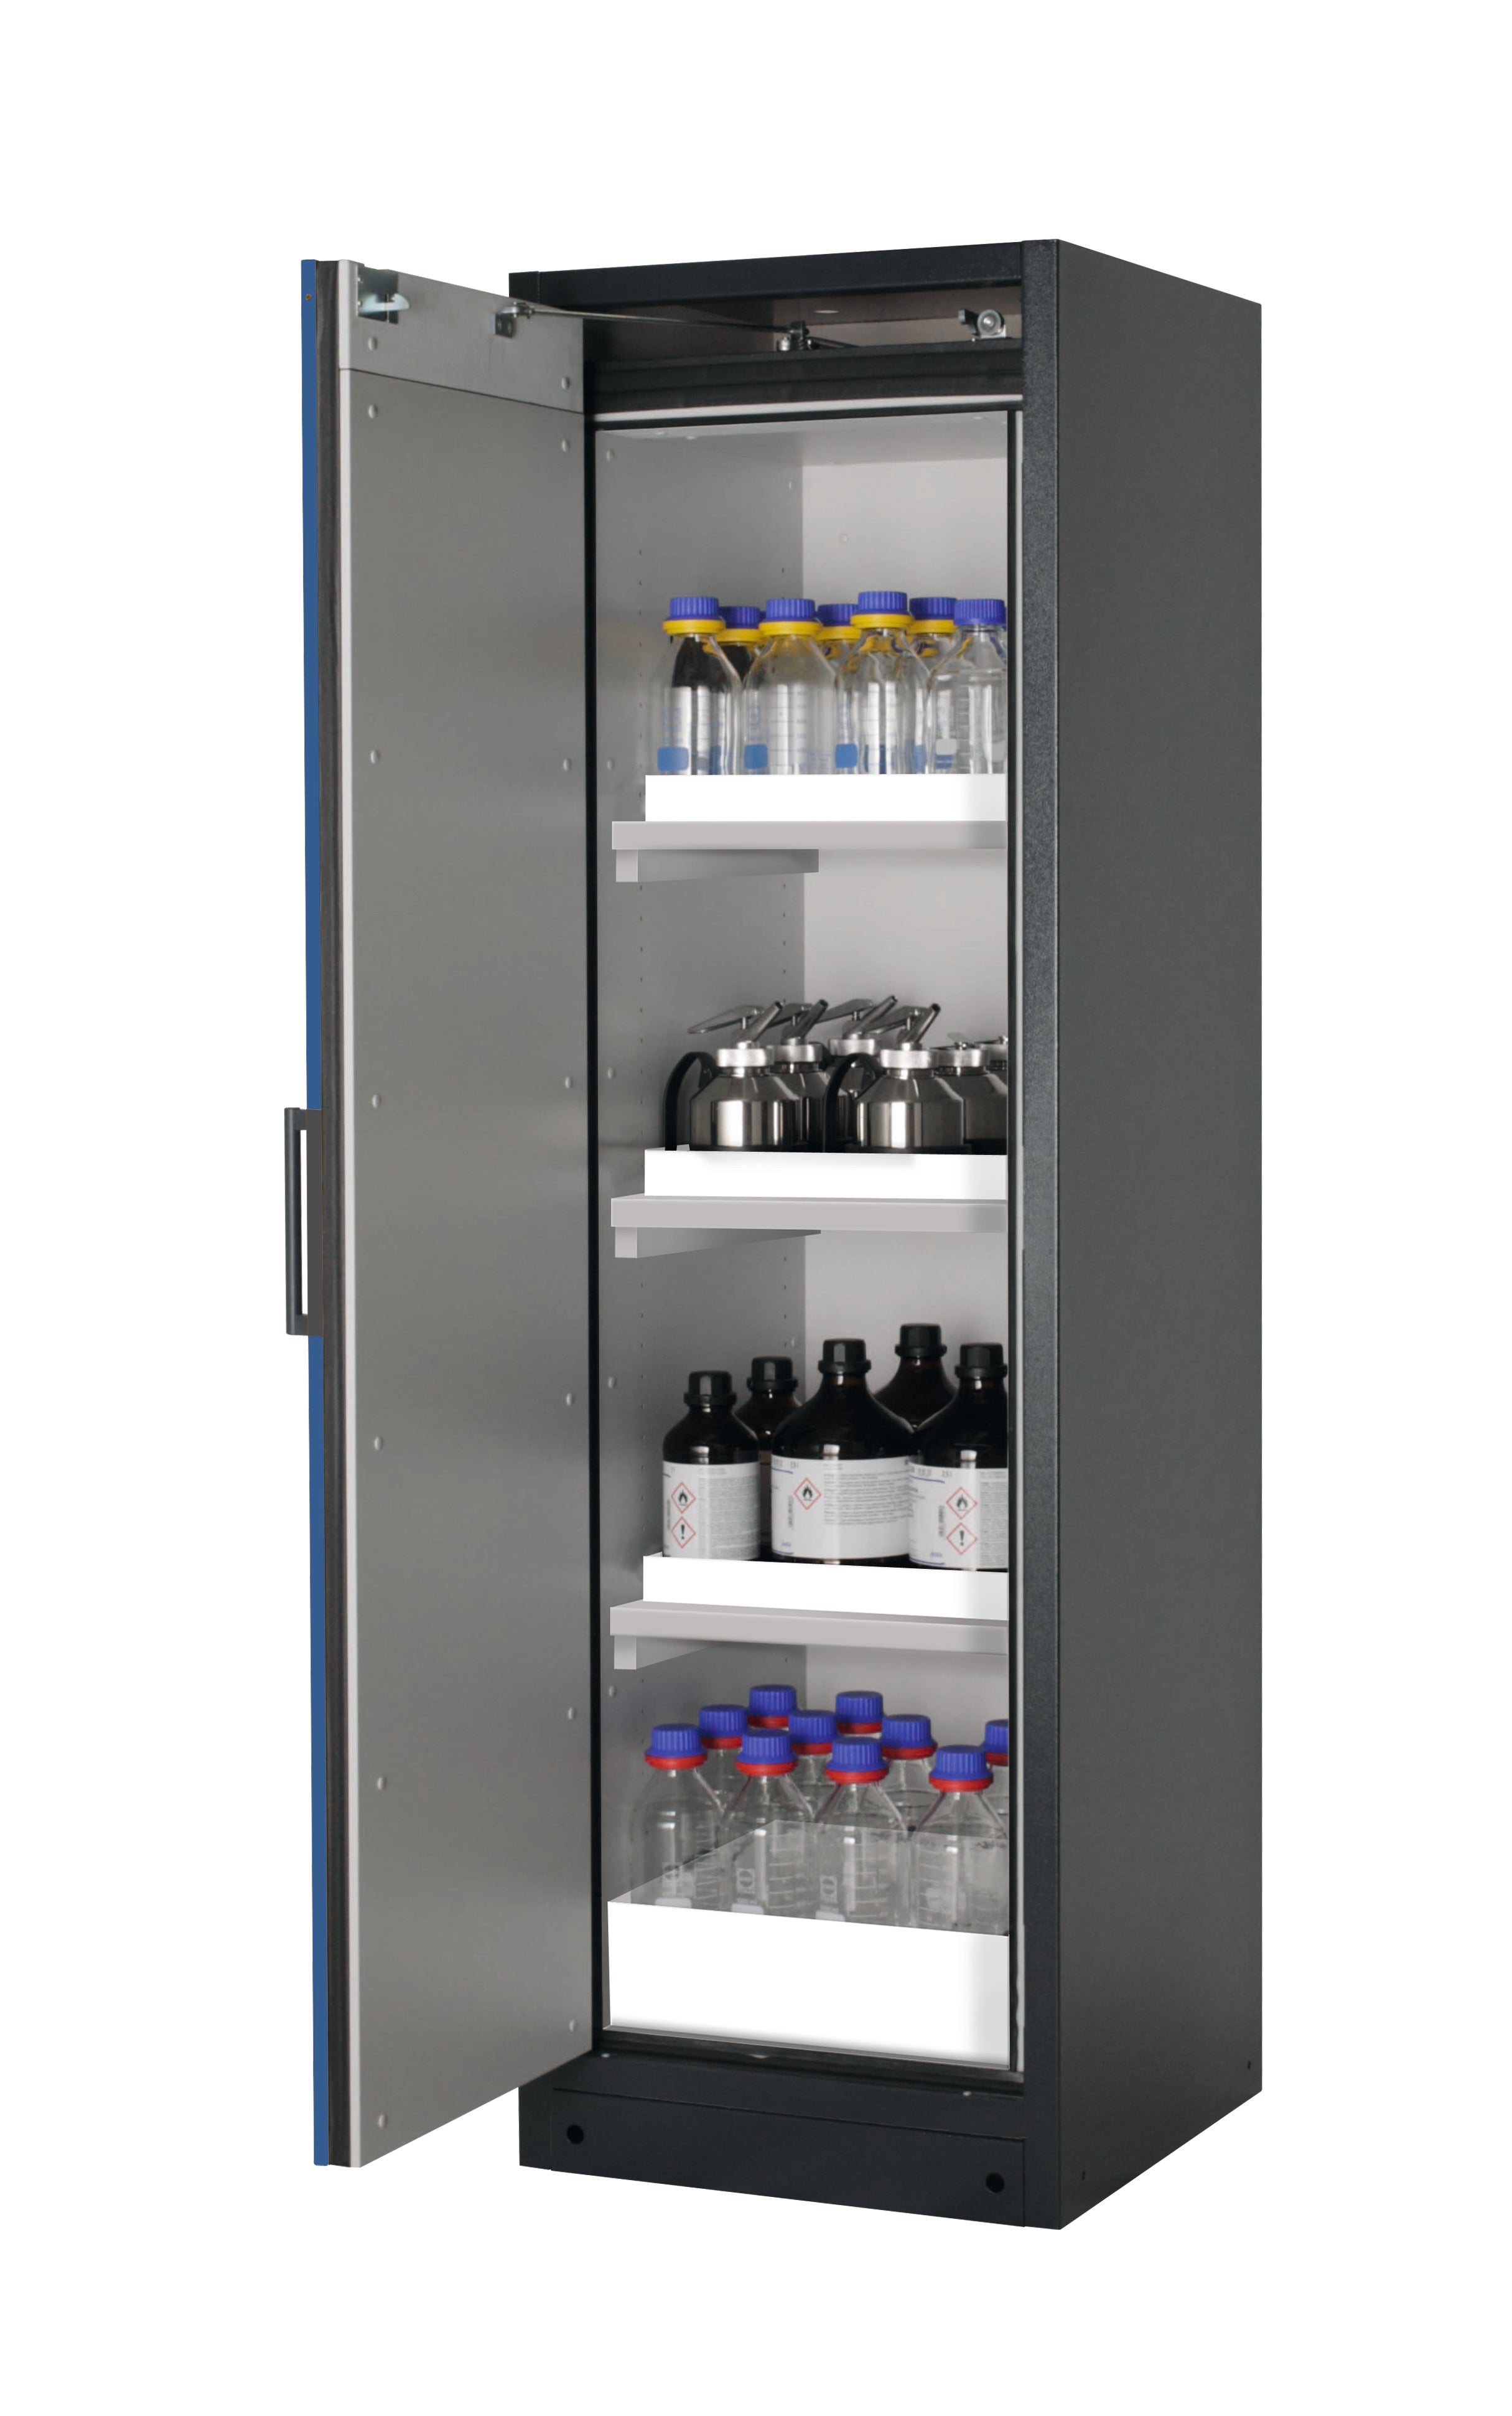 Type 90 safety storage cabinet Q-CLASSIC-90 model Q90.195.060 in gentian blue RAL 5010 with 3x tray shelf (standard) (polypropylene),